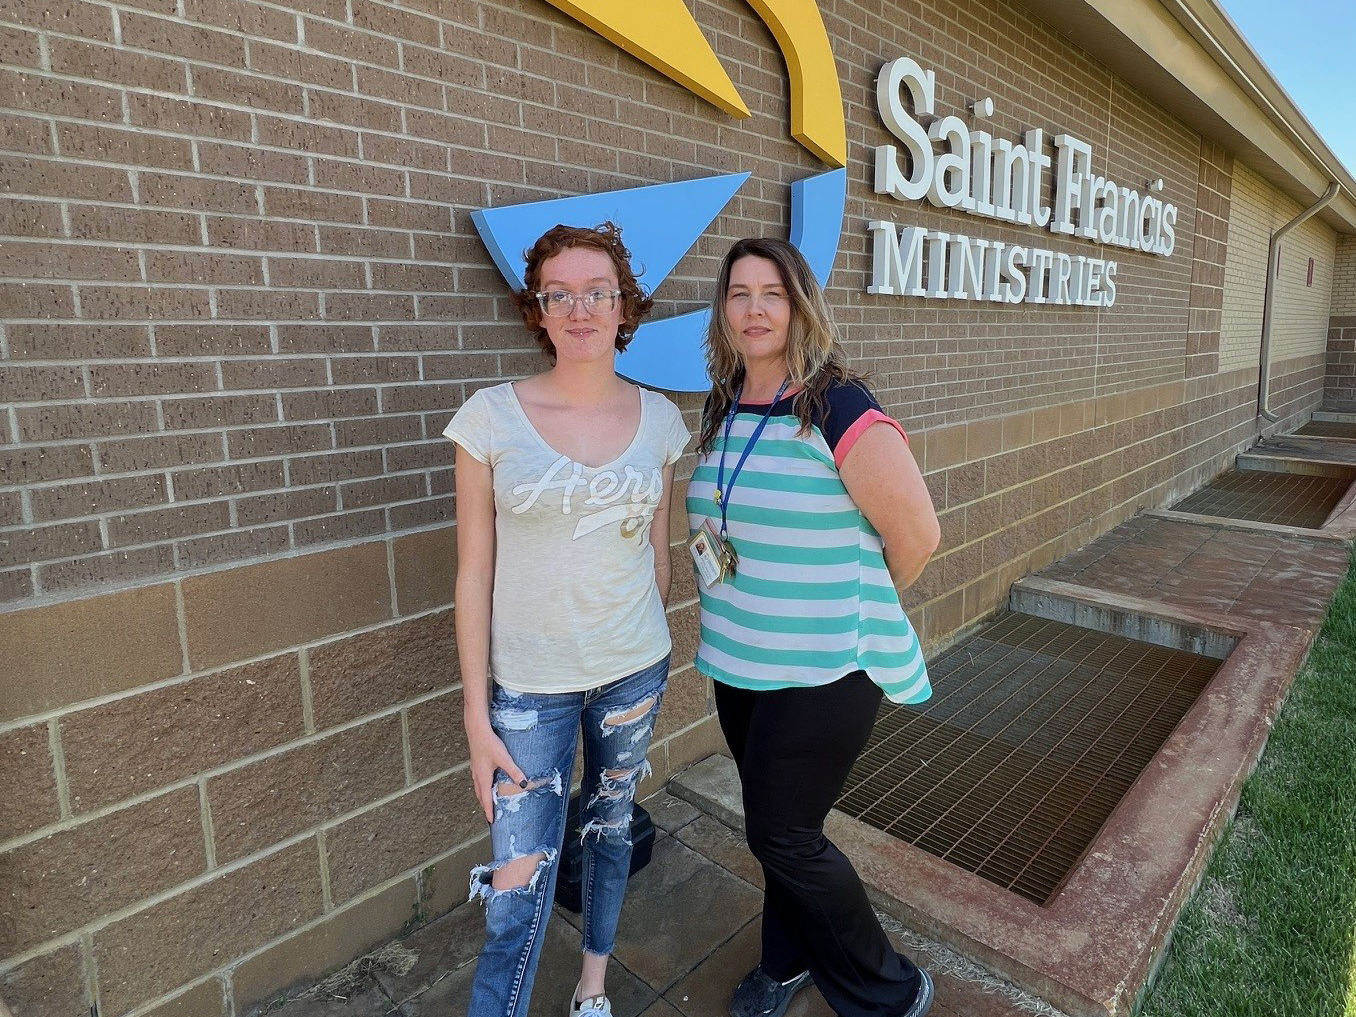 Two women stand in front of a brick building with a sign that reads "Saint Francis Ministries." One woman with glasses and curly hair is wearing a light t-shirt and ripped jeans. The other woman has long hair and is wearing a striped shirt with a name badge.